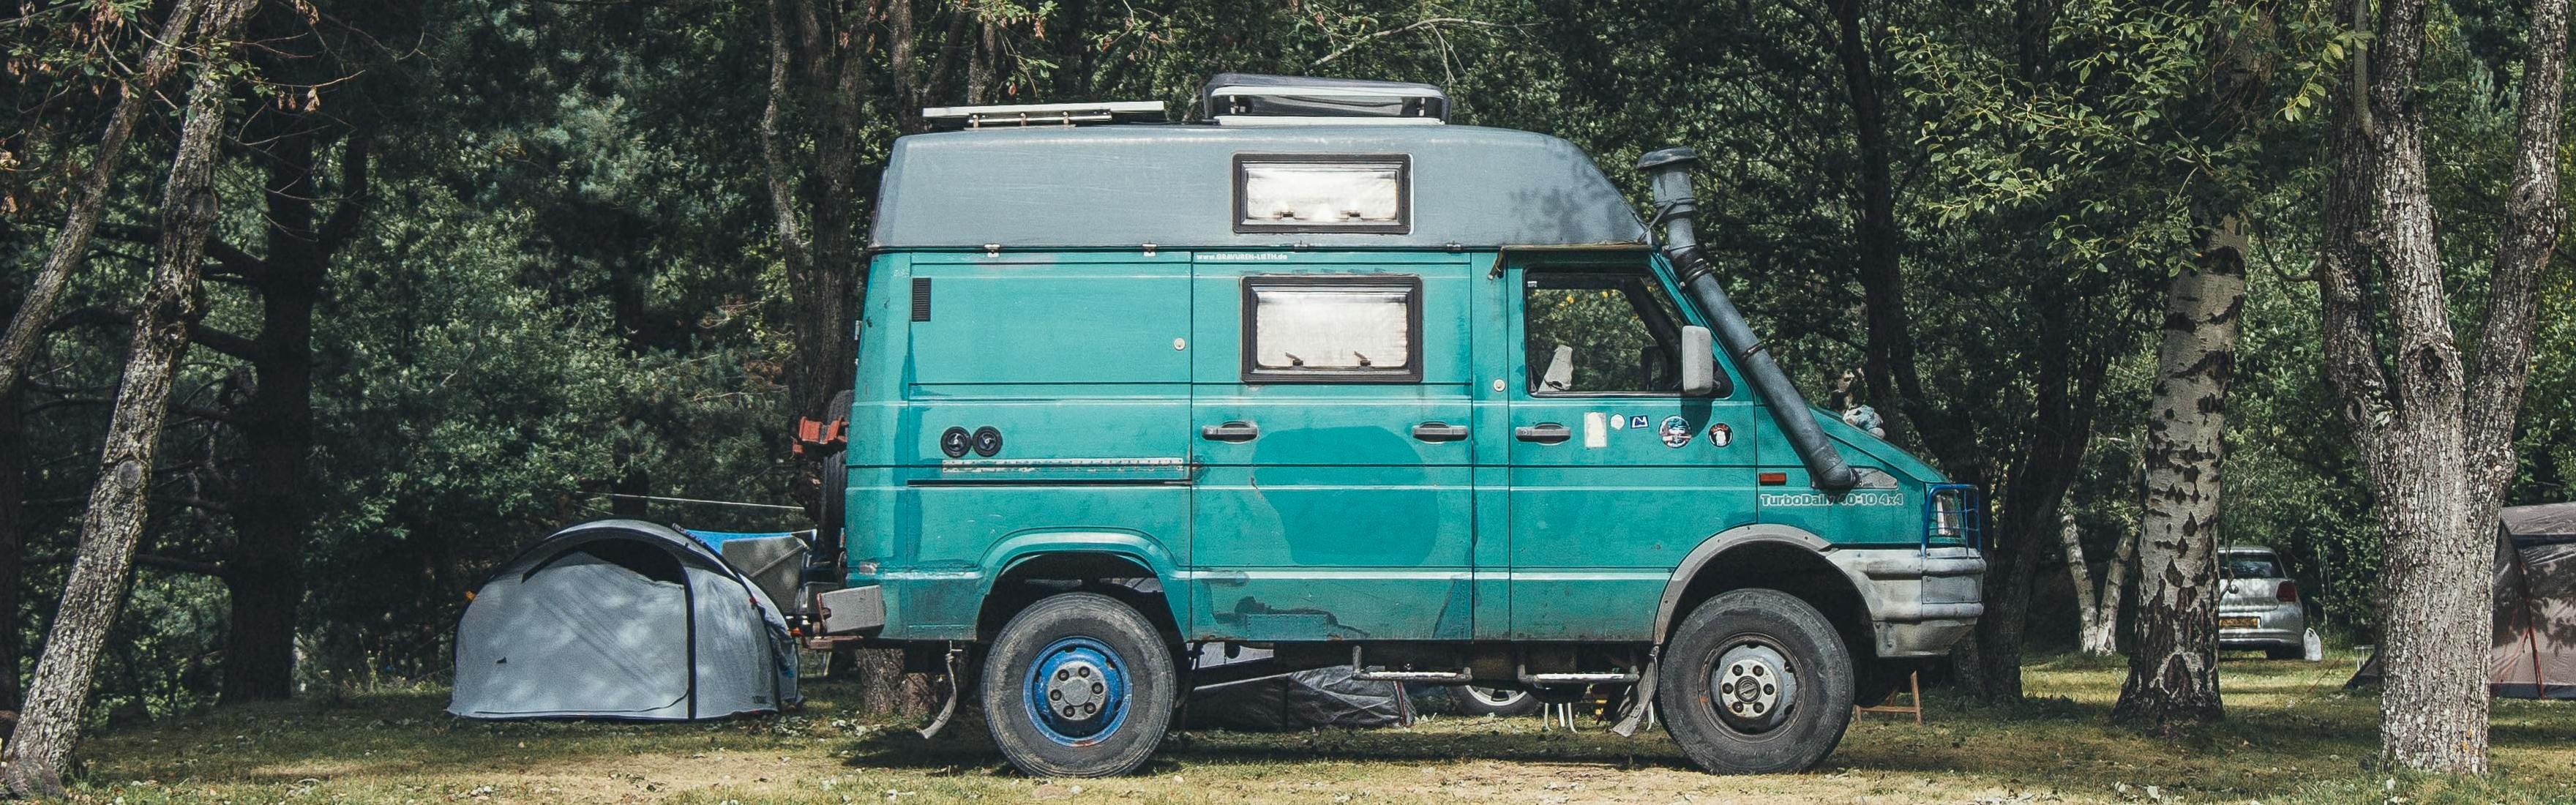 A turquoise campervan at a campsite